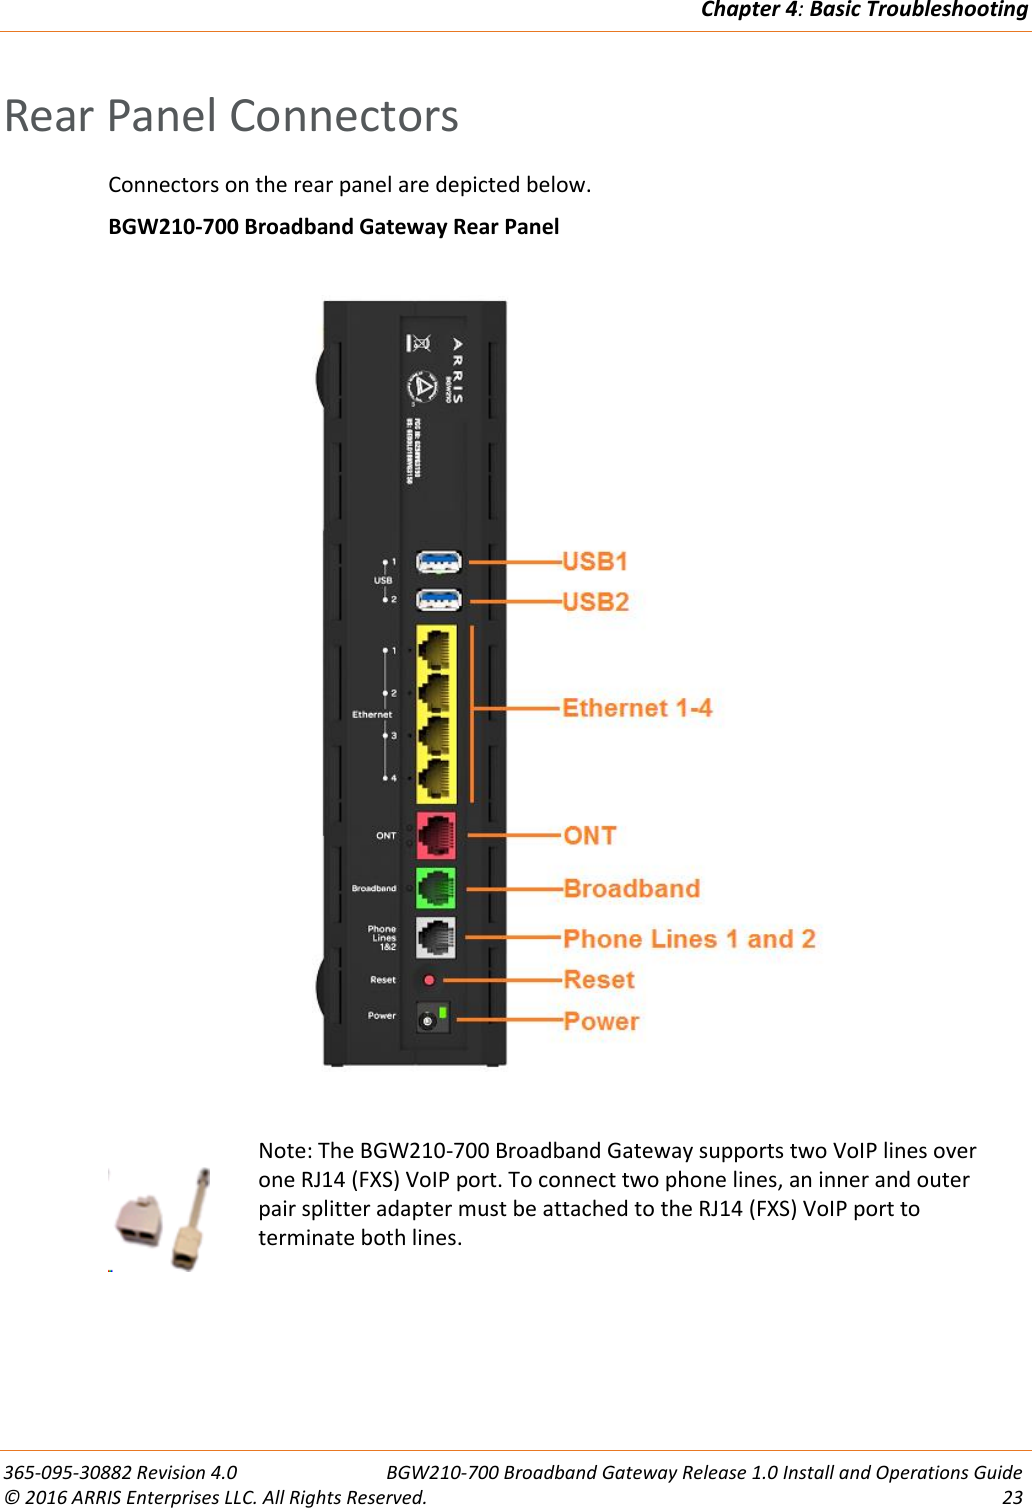 Chapter 4: Basic Troubleshooting  365-095-30882 Revision 4.0  BGW210-700 Broadband Gateway Release 1.0 Install and Operations Guide © 2016 ARRIS Enterprises LLC. All Rights Reserved.  23  Rear Panel Connectors Connectors on the rear panel are depicted below. BGW210-700 Broadband Gateway Rear Panel        Note: The BGW210-700 Broadband Gateway supports two VoIP lines over one RJ14 (FXS) VoIP port. To connect two phone lines, an inner and outer pair splitter adapter must be attached to the RJ14 (FXS) VoIP port to terminate both lines.     